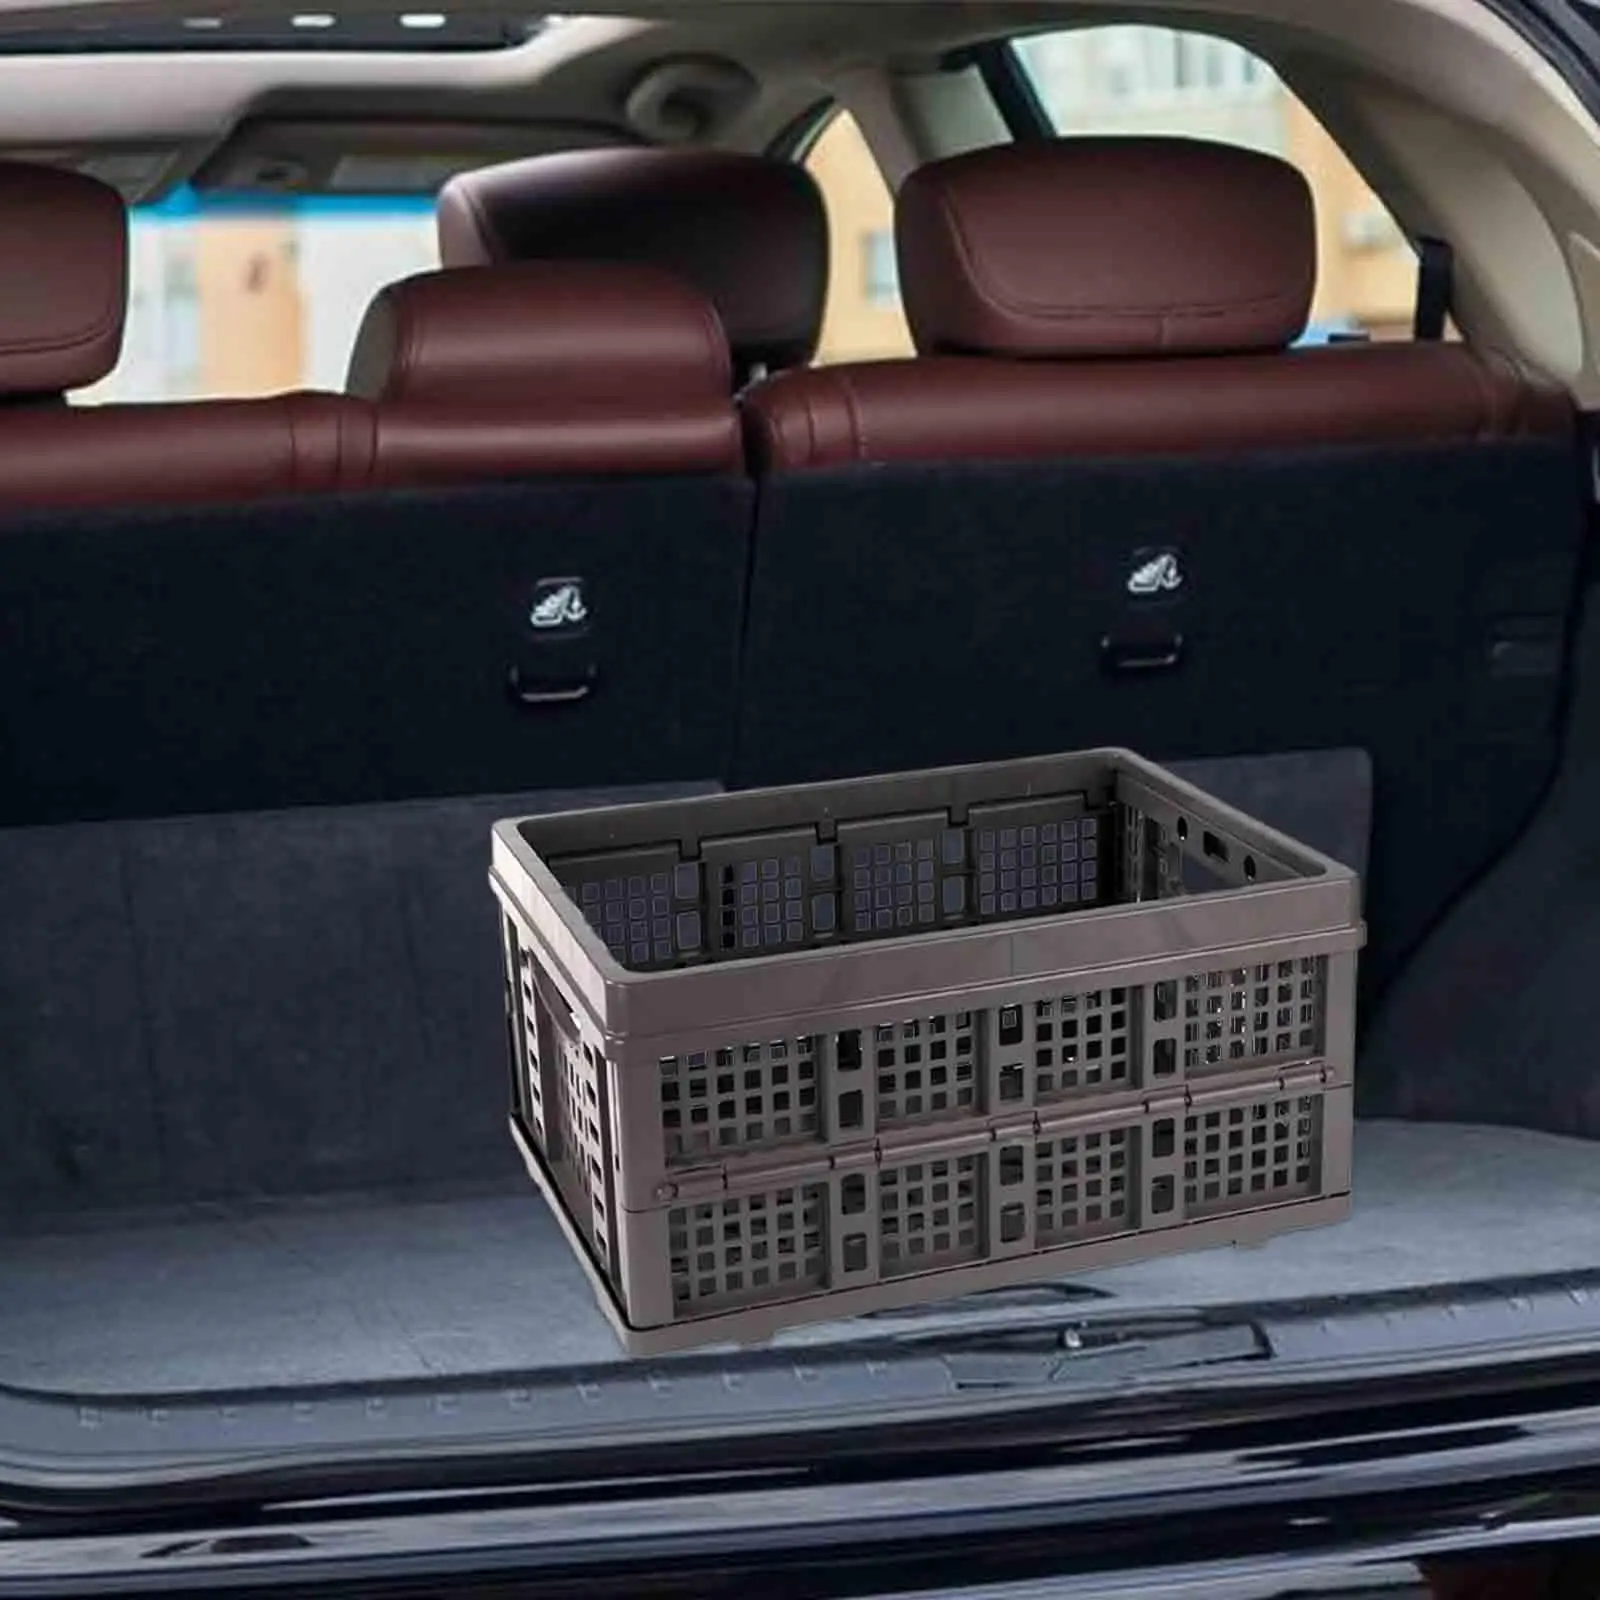 Container Utility Crate Bins Carrier Large Cargo Basket Camping Storage Crate for Picnic Backpacking Traveling Car Bedroom